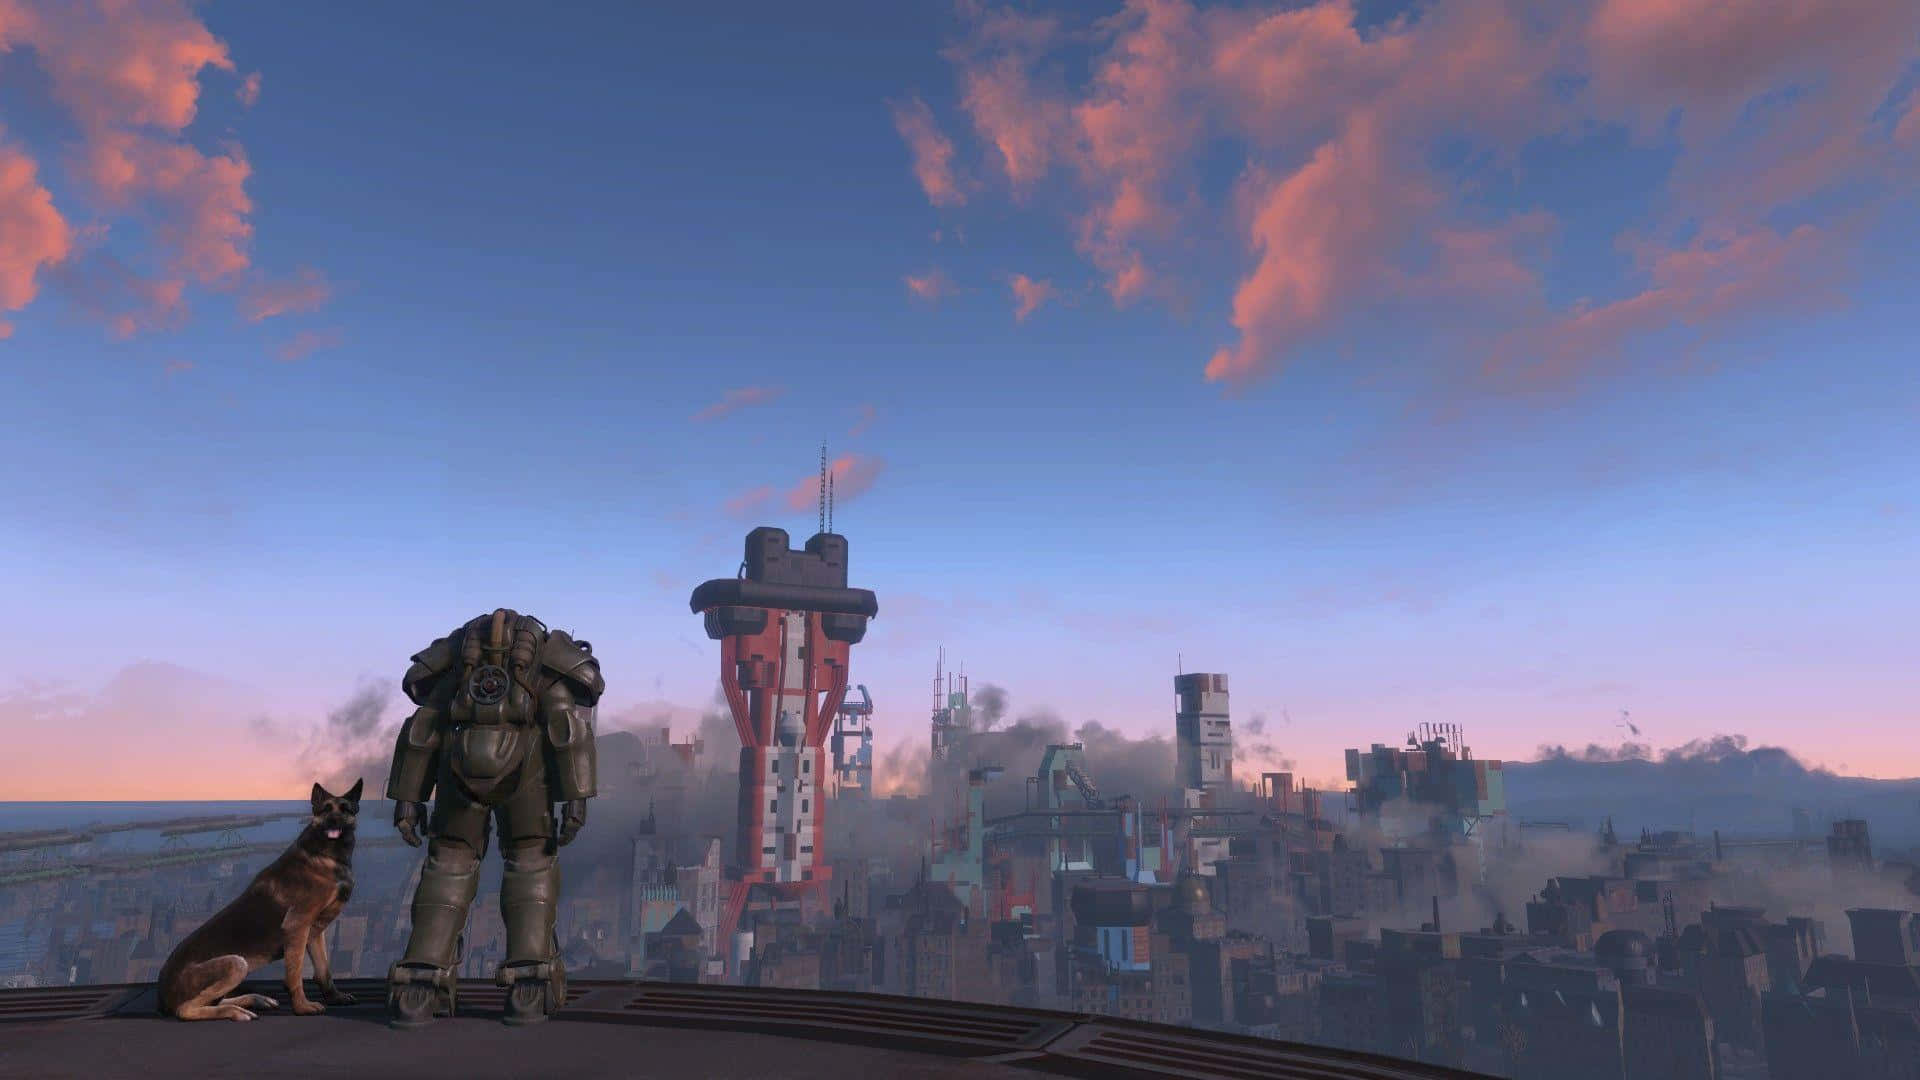 Welcome To The Wasteland Of Fallout 4 Wallpaper